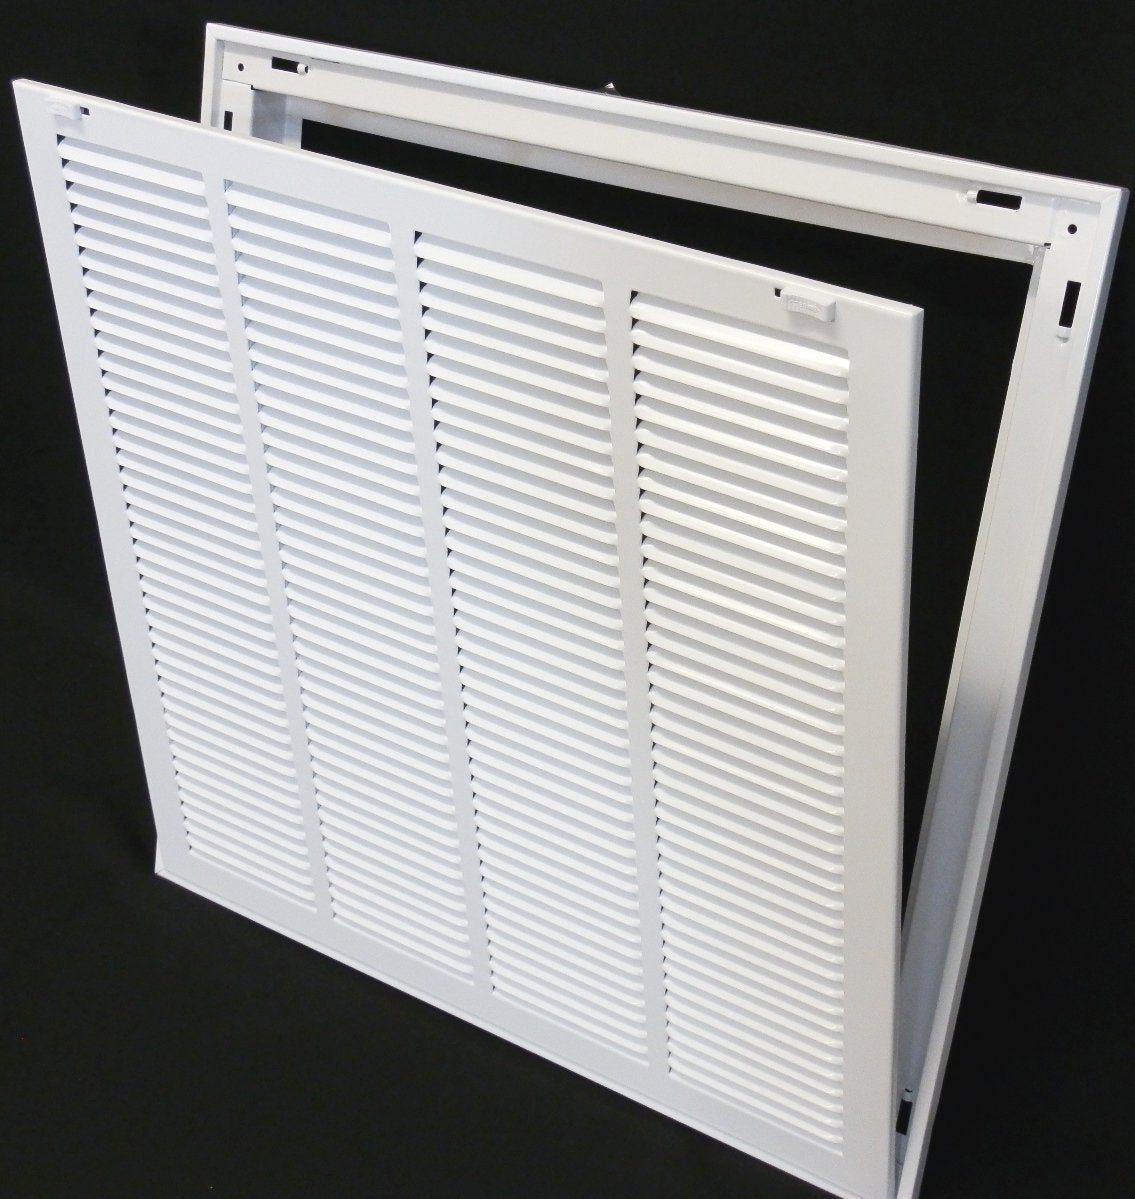 28&quot; X 6&quot; Steel Return Air Filter Grille for 1&quot; Filter - Removable Frame - [Outer Dimensions: 30 5/8&quot; X 8 5/8&quot;]